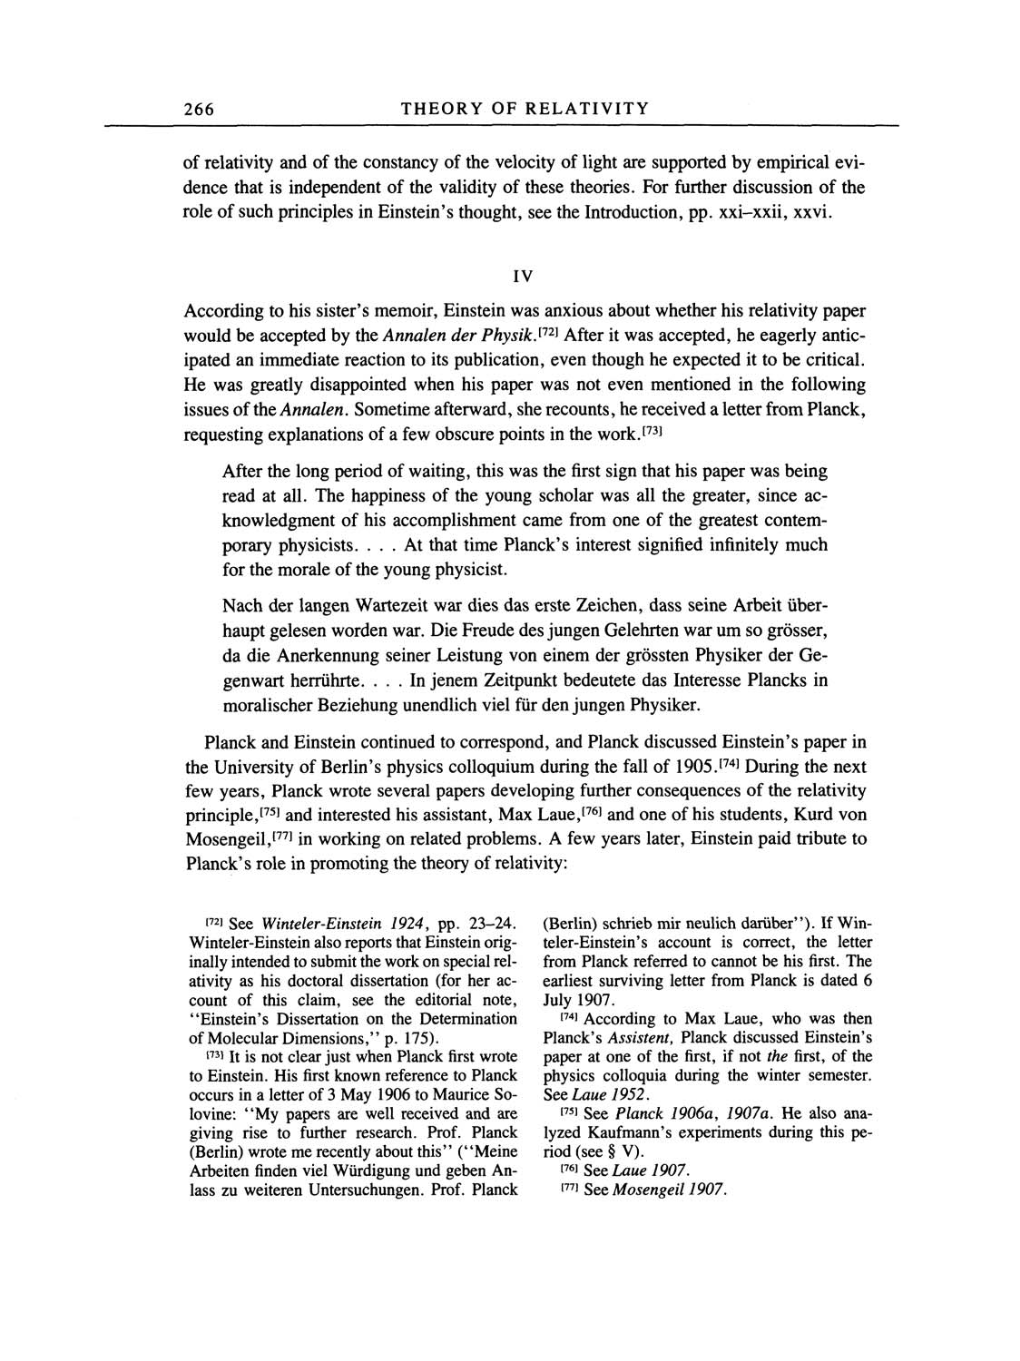 Volume 2: The Swiss Years: Writings, 1900-1909 page 266